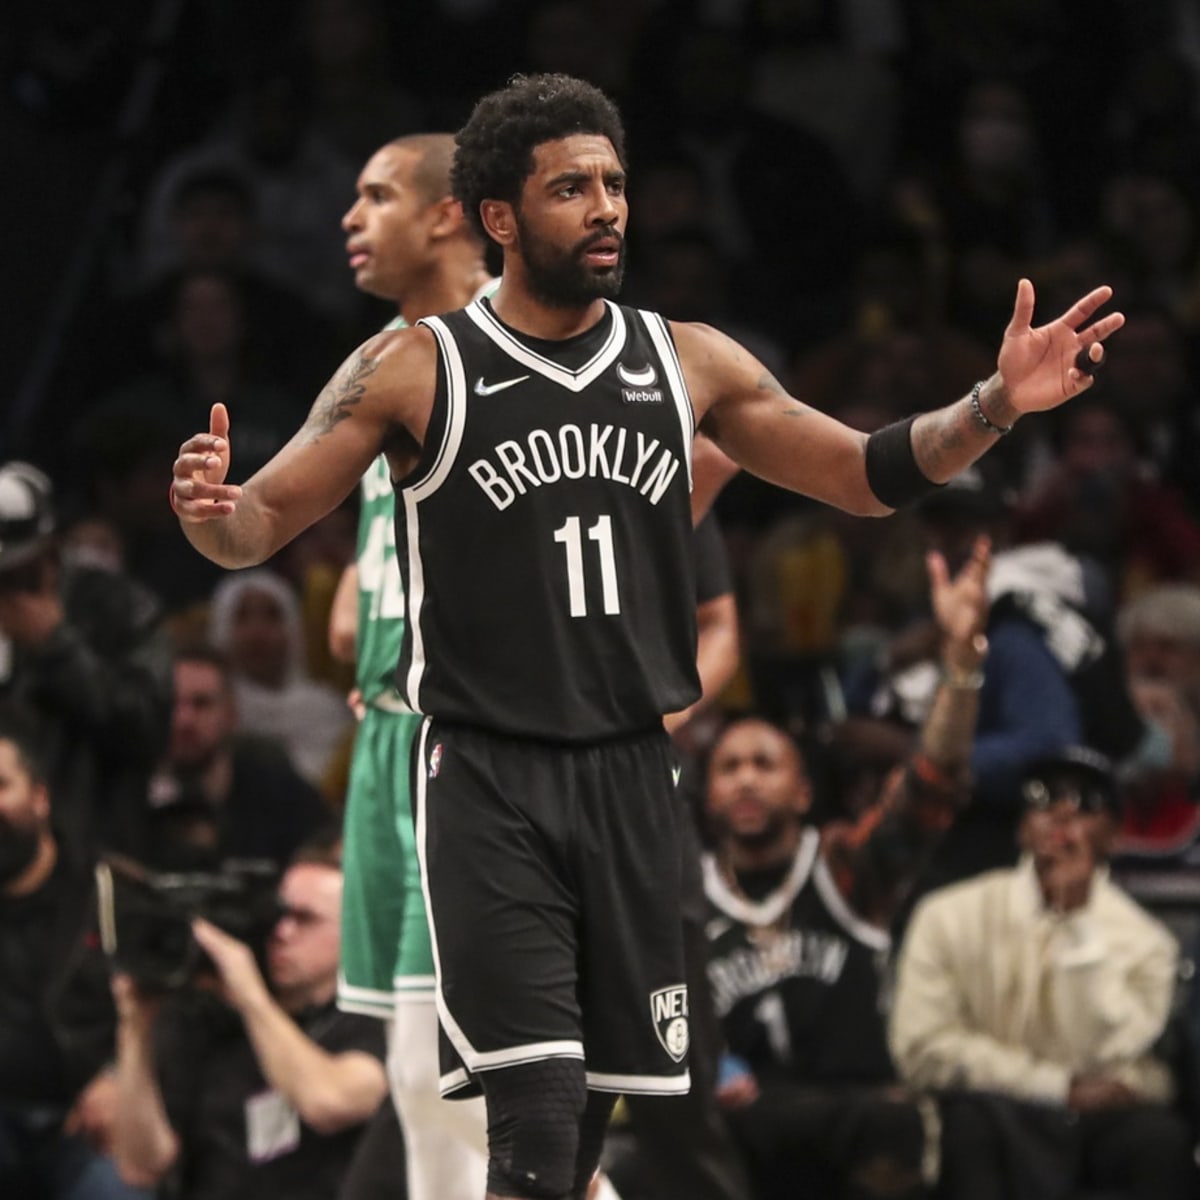 Philadelphia Sixers lose 122-109 to Brooklyn Nets missing Kyrie